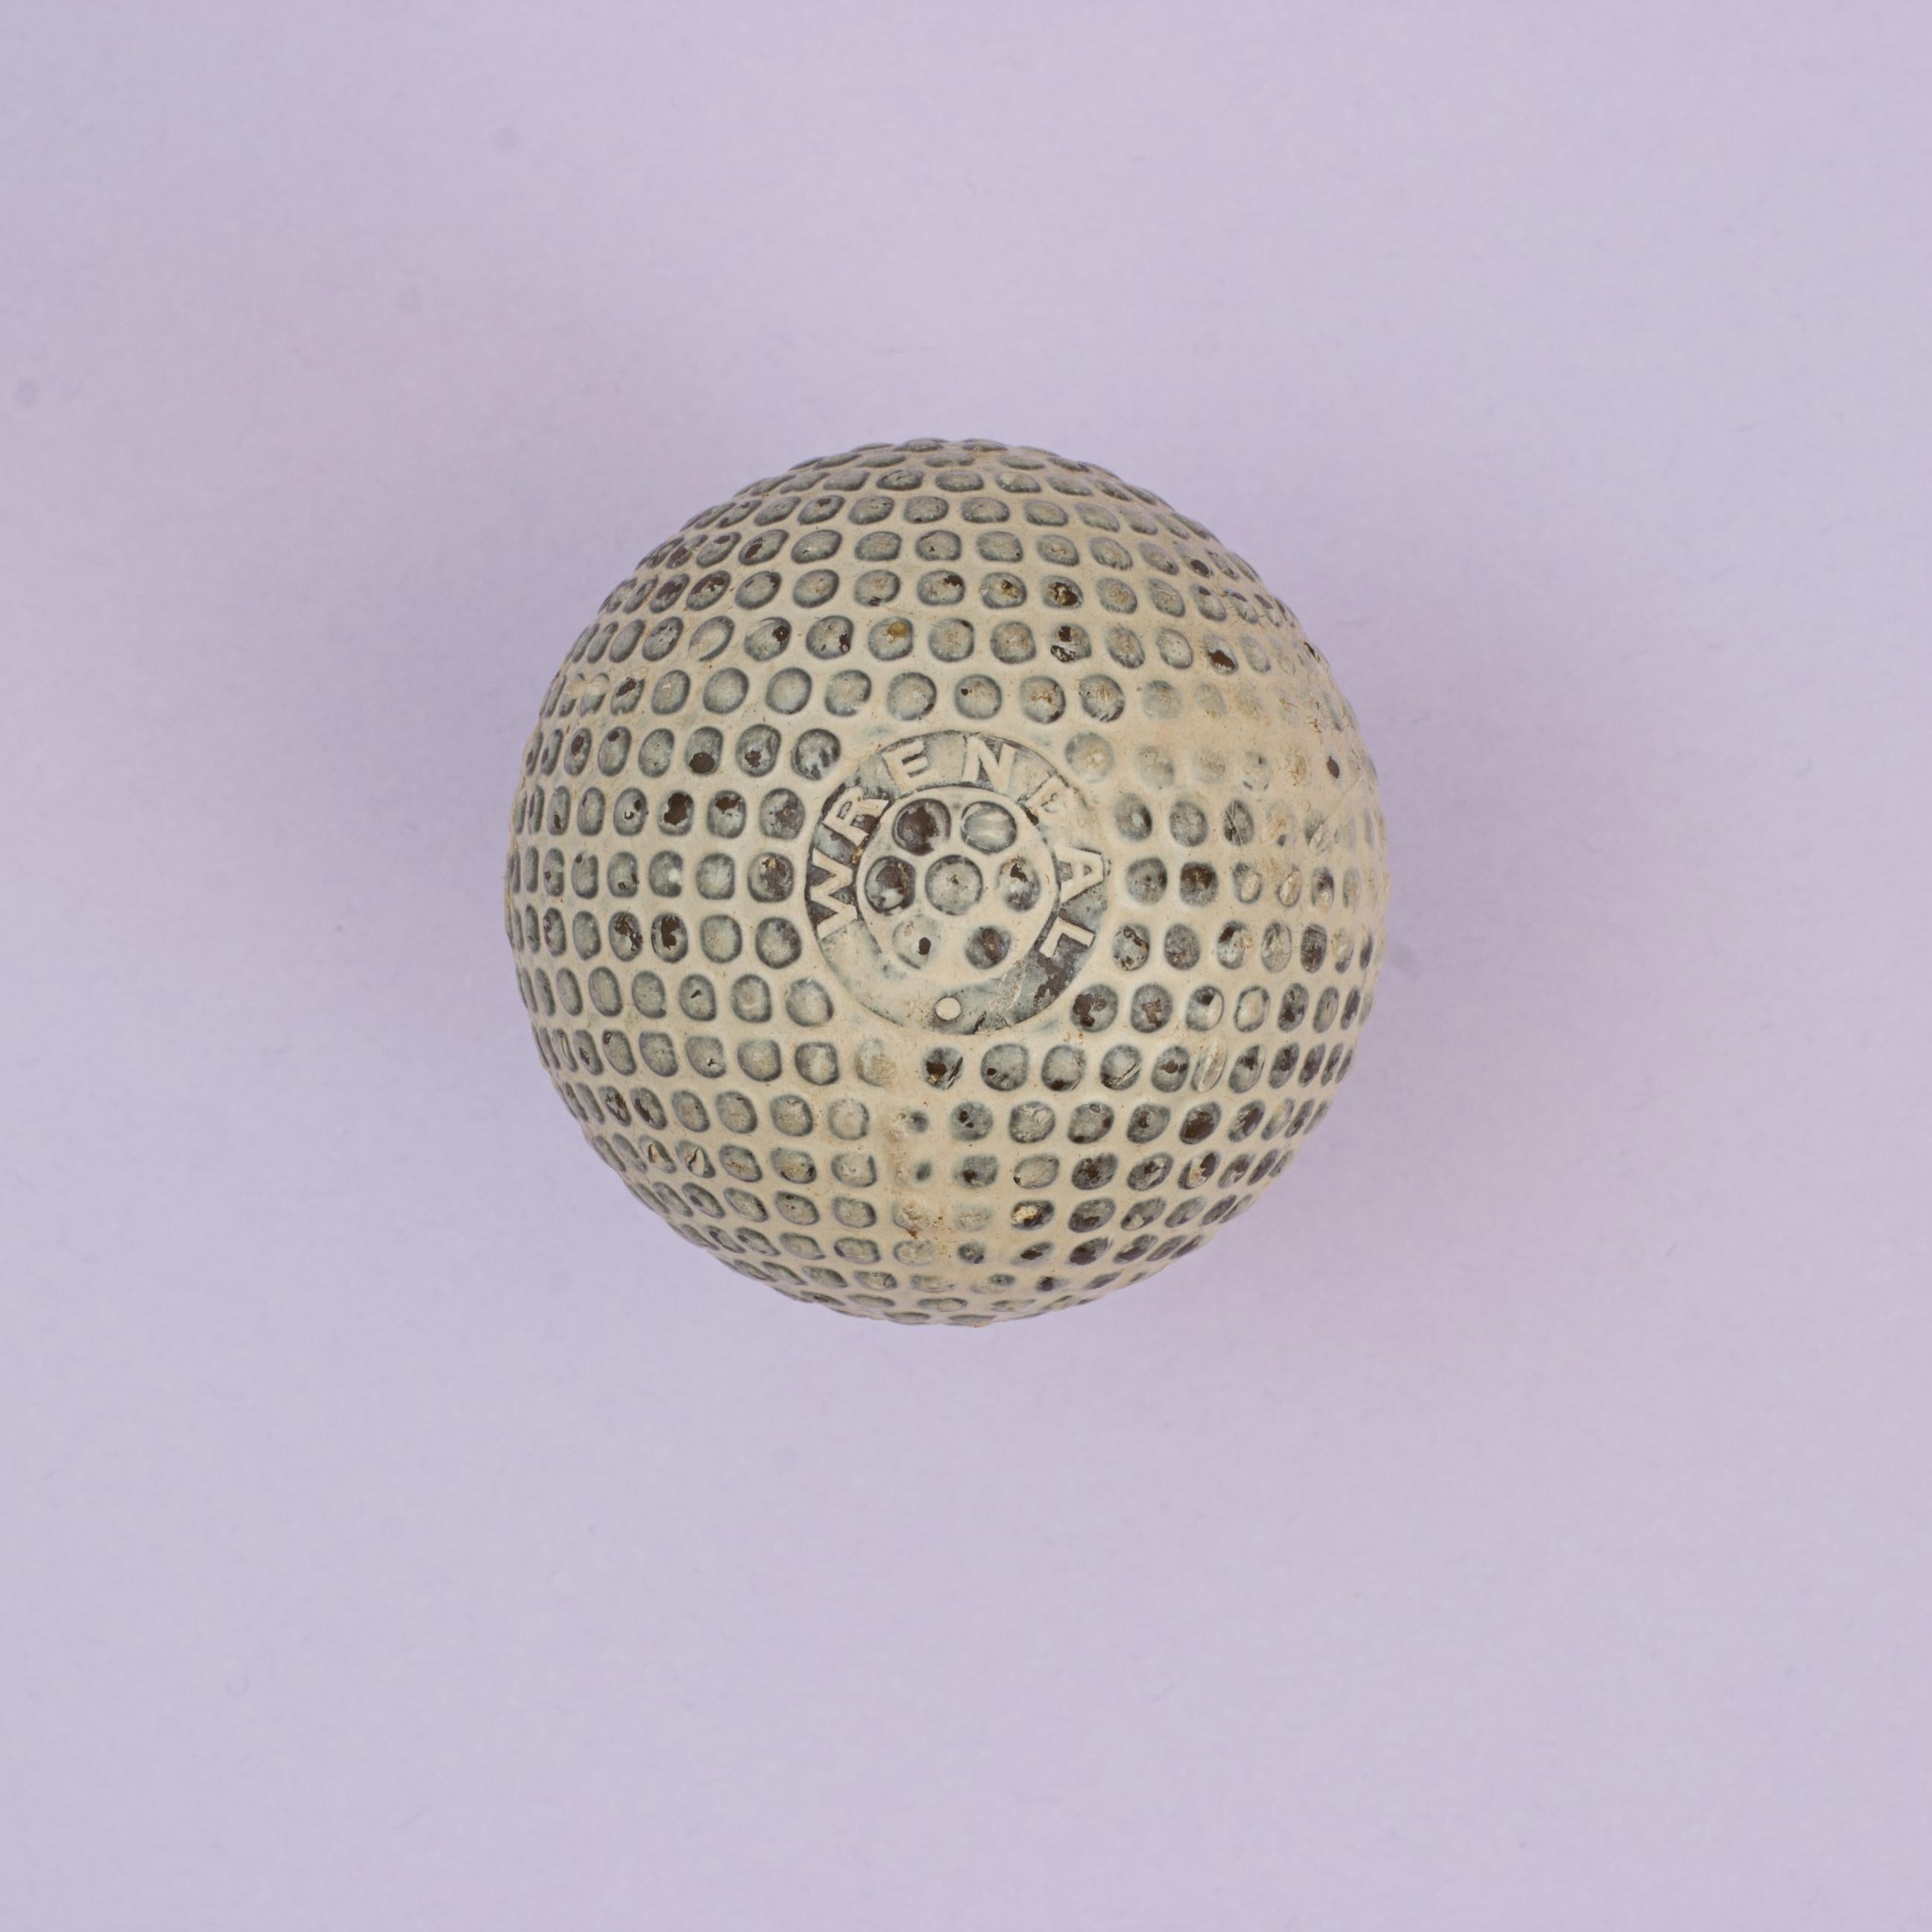 Rare Wrendal Bramble Golf Ball.
A very nice named bramble pattern golf ball with lots of paint on the surface. The gutta percha covered, rubber core, golf ball with a rare name 